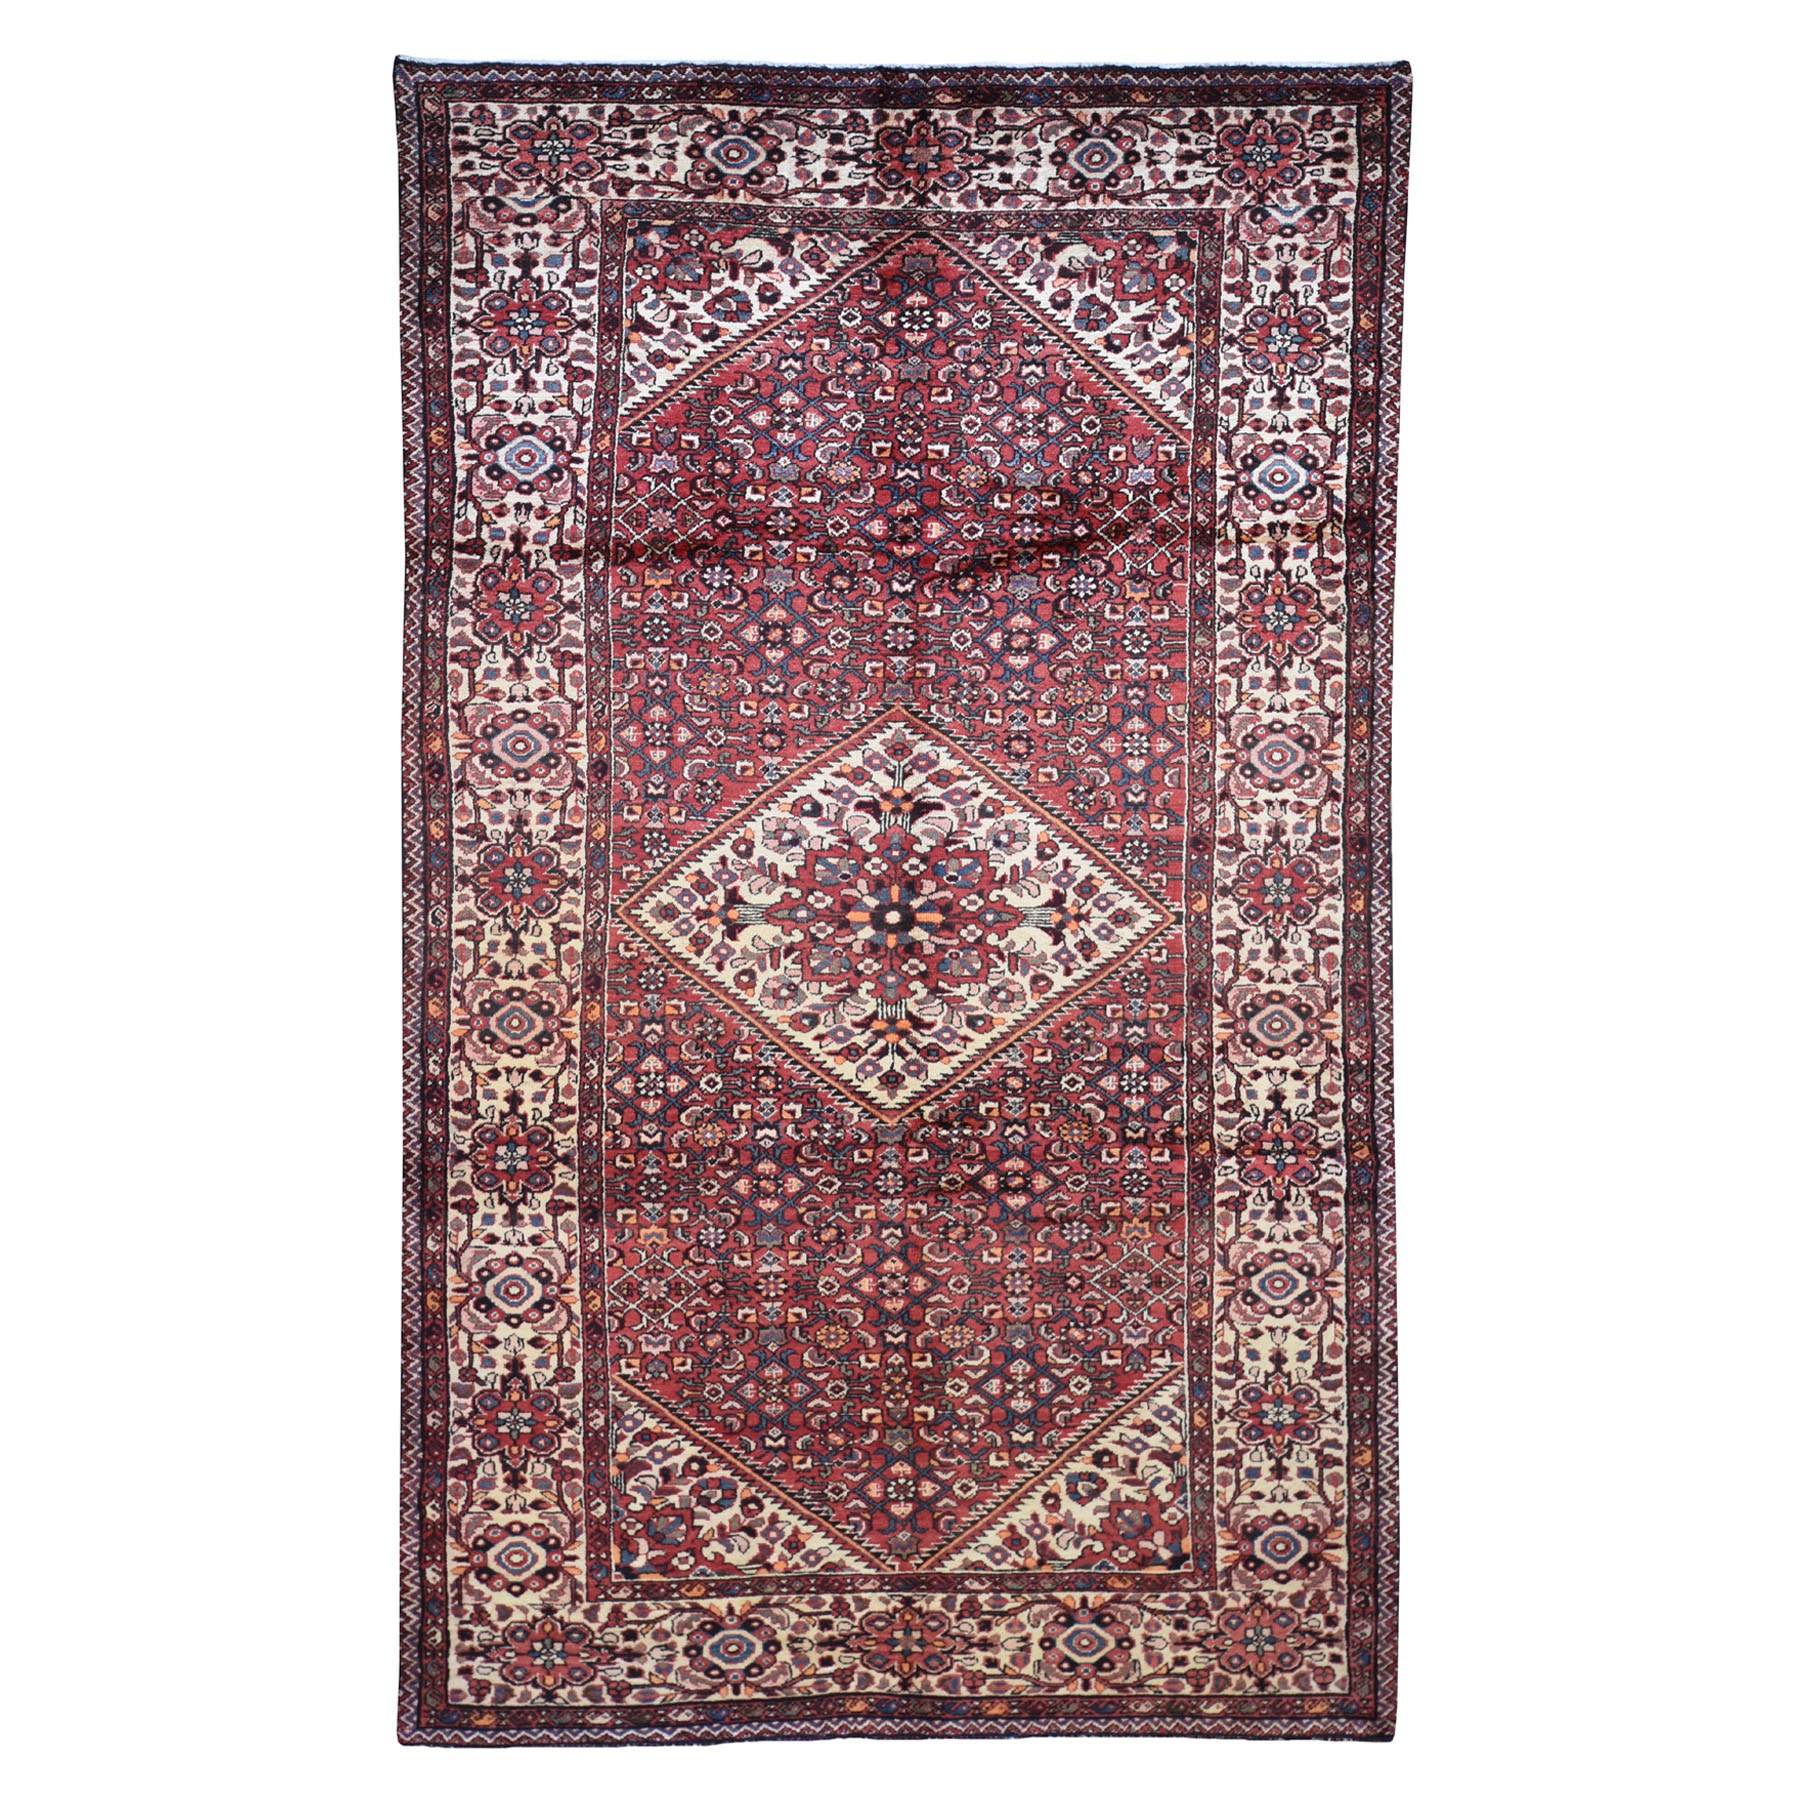 5'3"x11' Gallery Size Red New Persian Bakhtiari Pure Wool Hand Woven Oriental Rug 